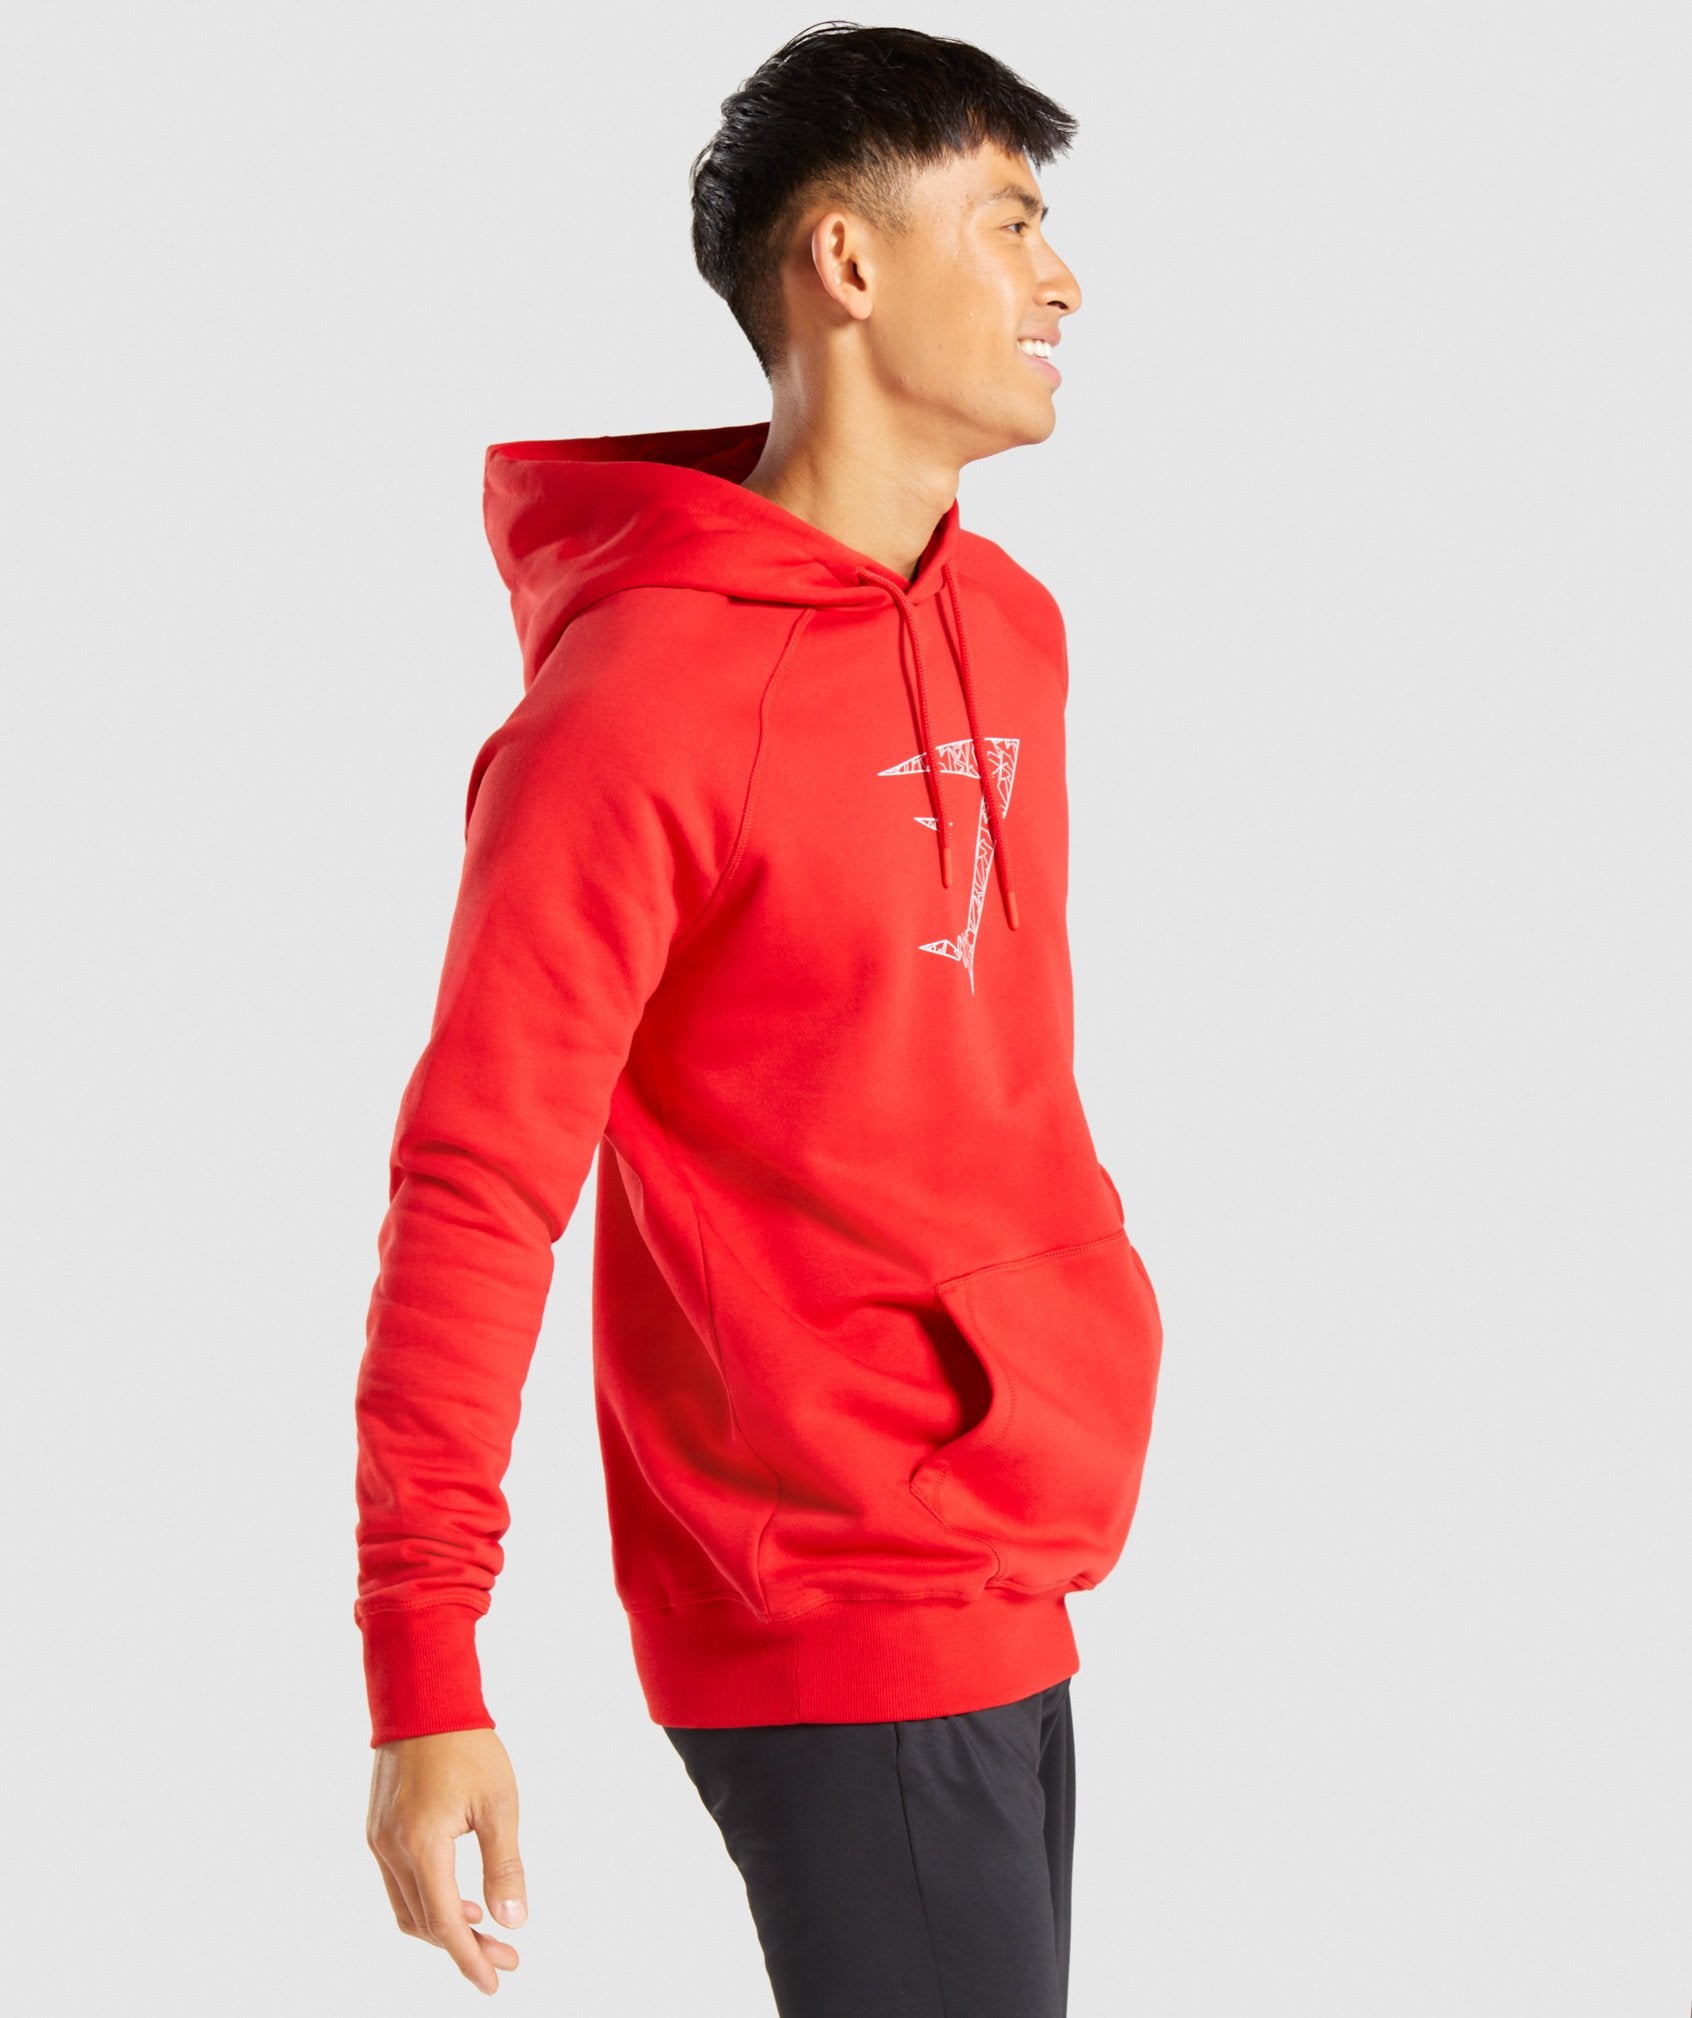 Infill Hoodie in Red - view 3